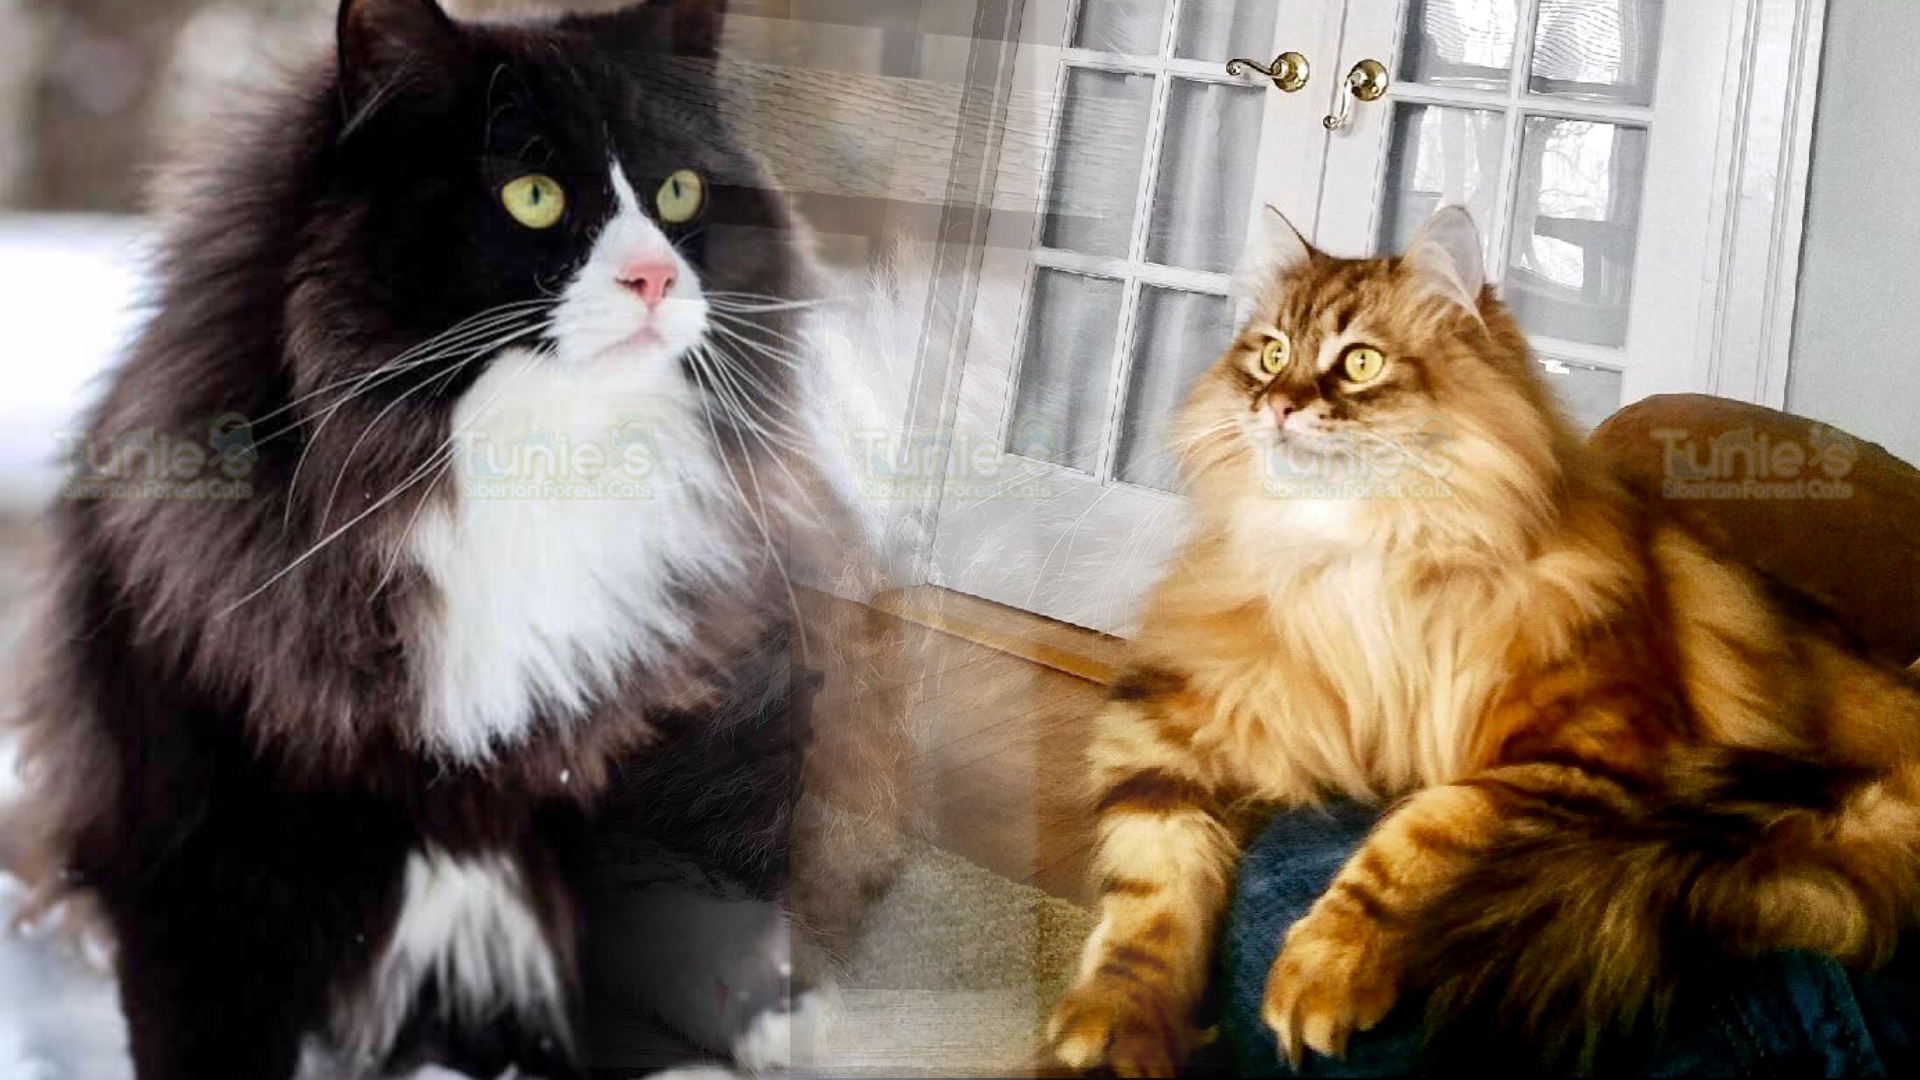 Tunie S Siberians Minnesota S Foremost Home Of Traditional Siberian Forest Cats And Kittens